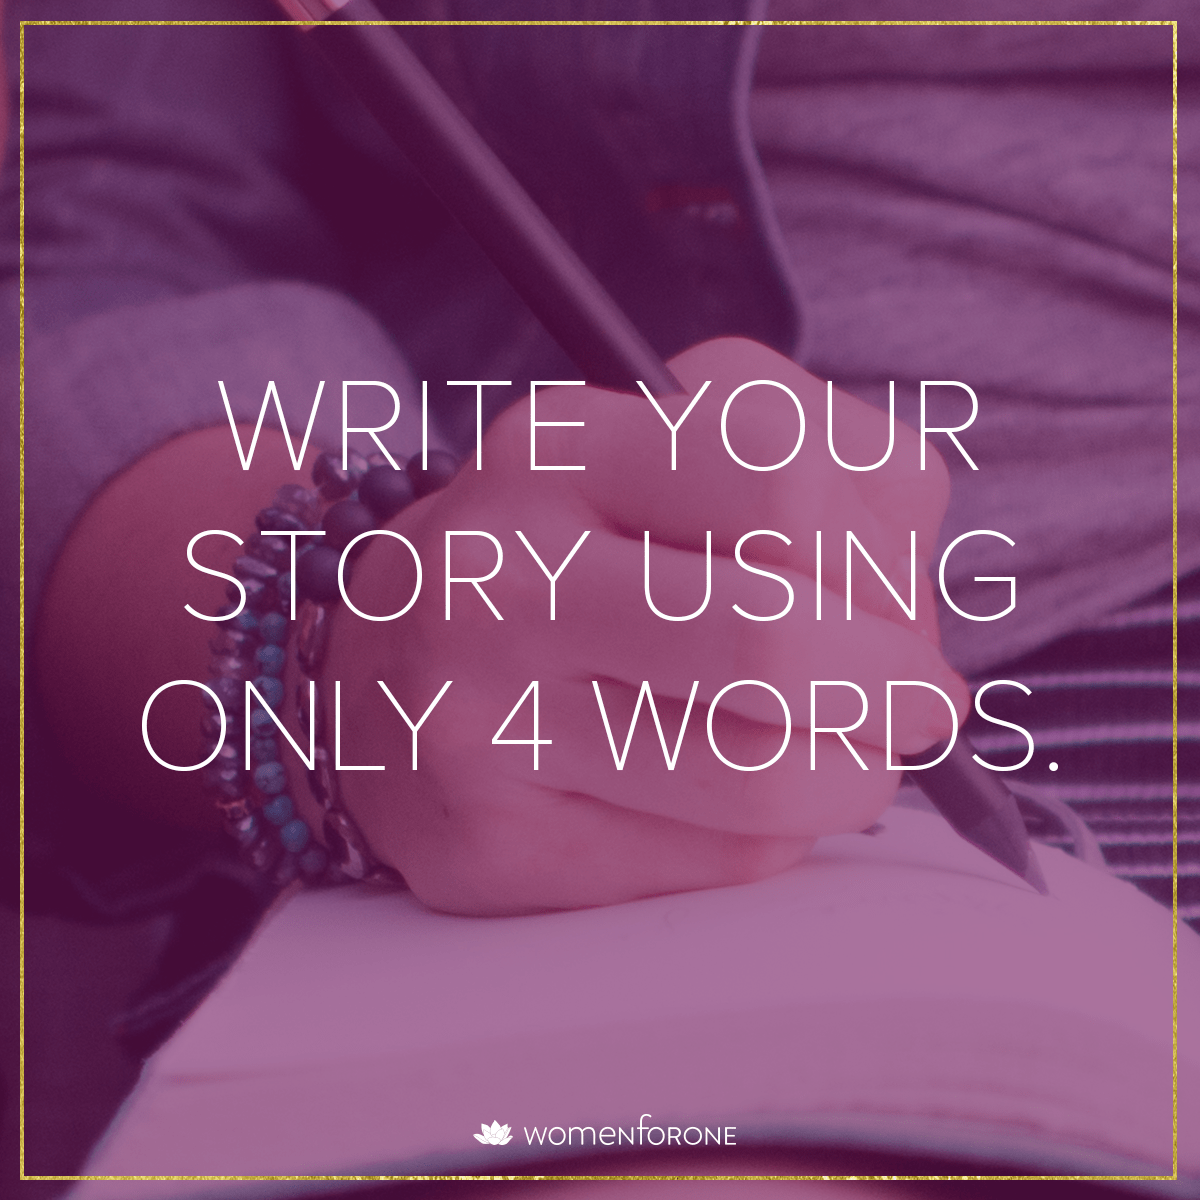 Write your story using only 4 words.